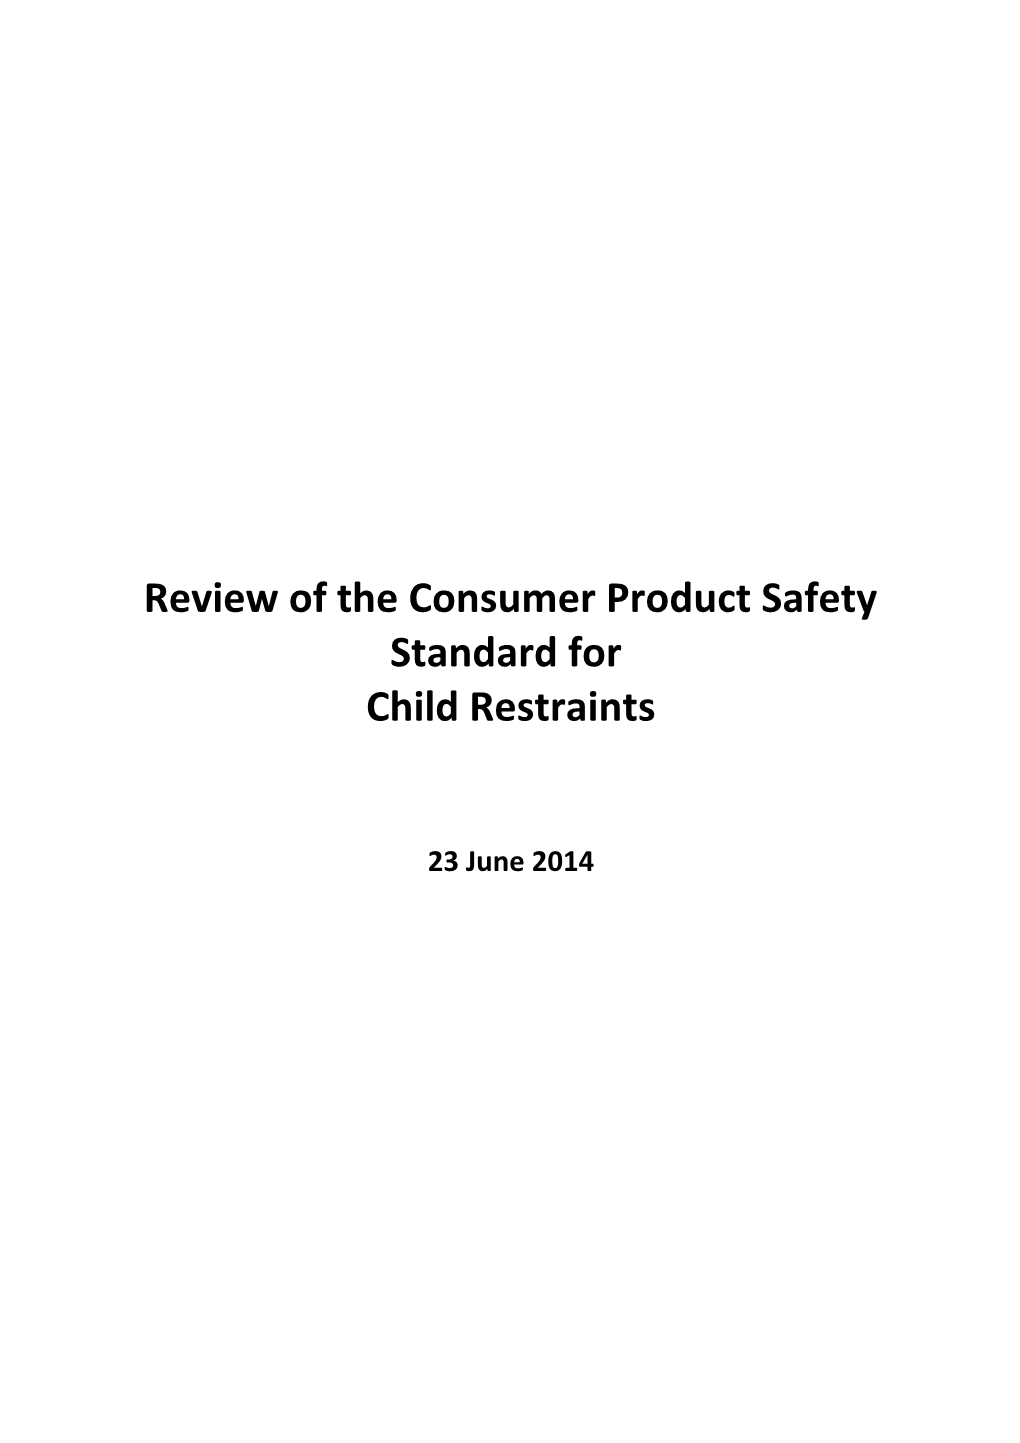 Review of the Consumer Product Safety Standard For